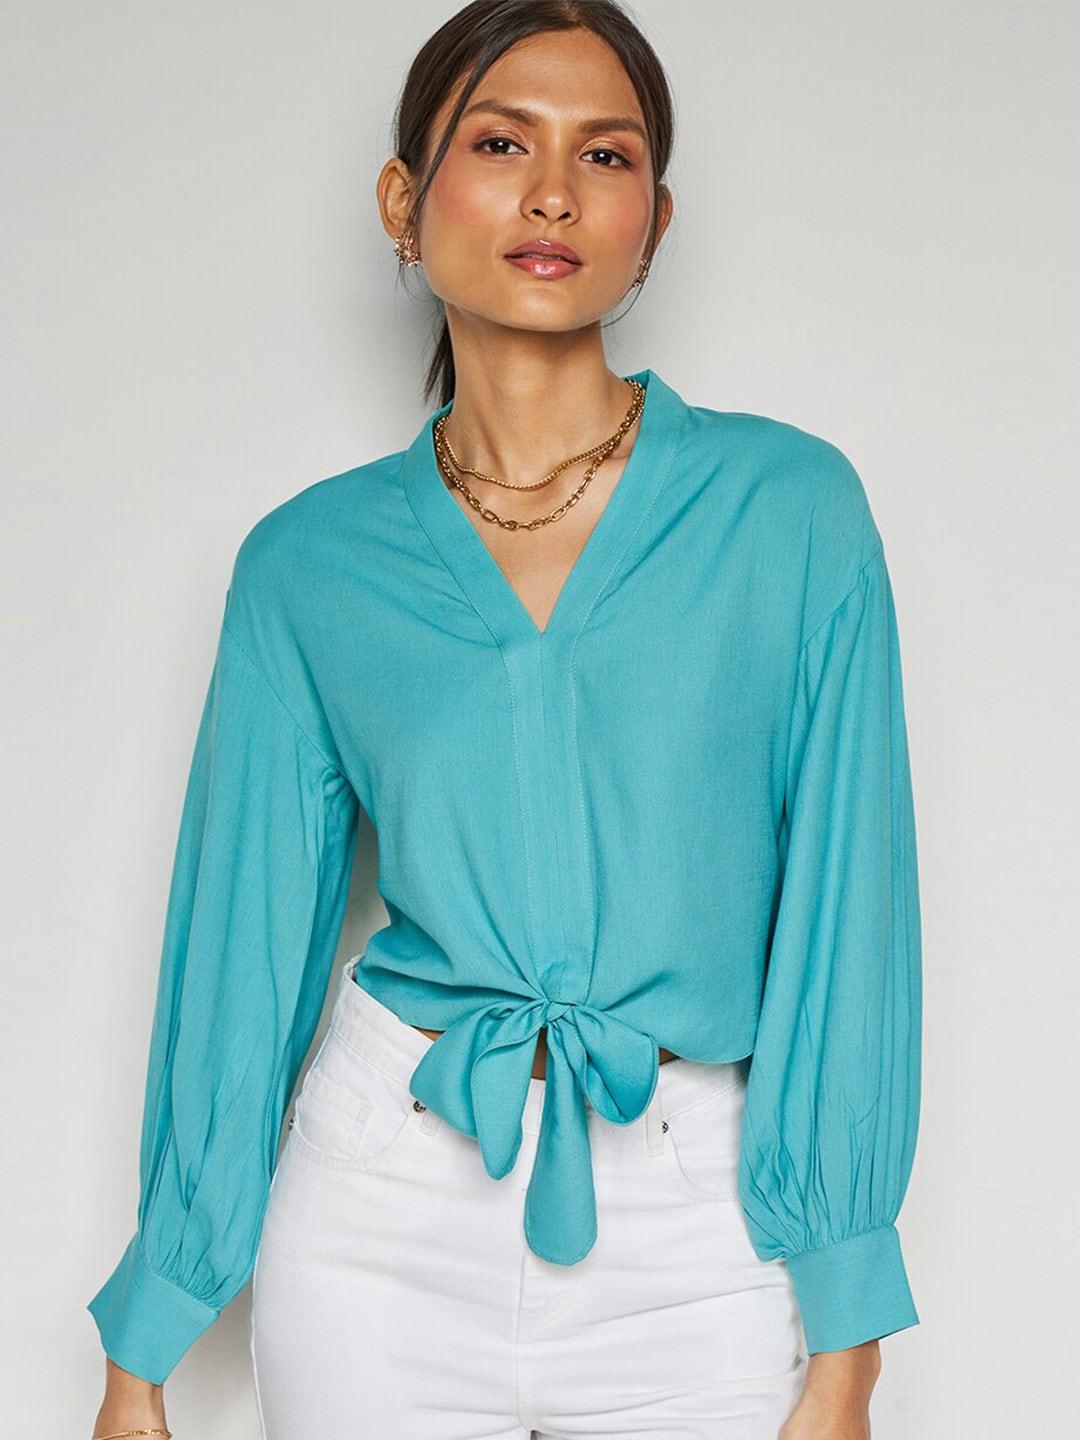 and-v-neck-tie-up-detail-shirt-style-top